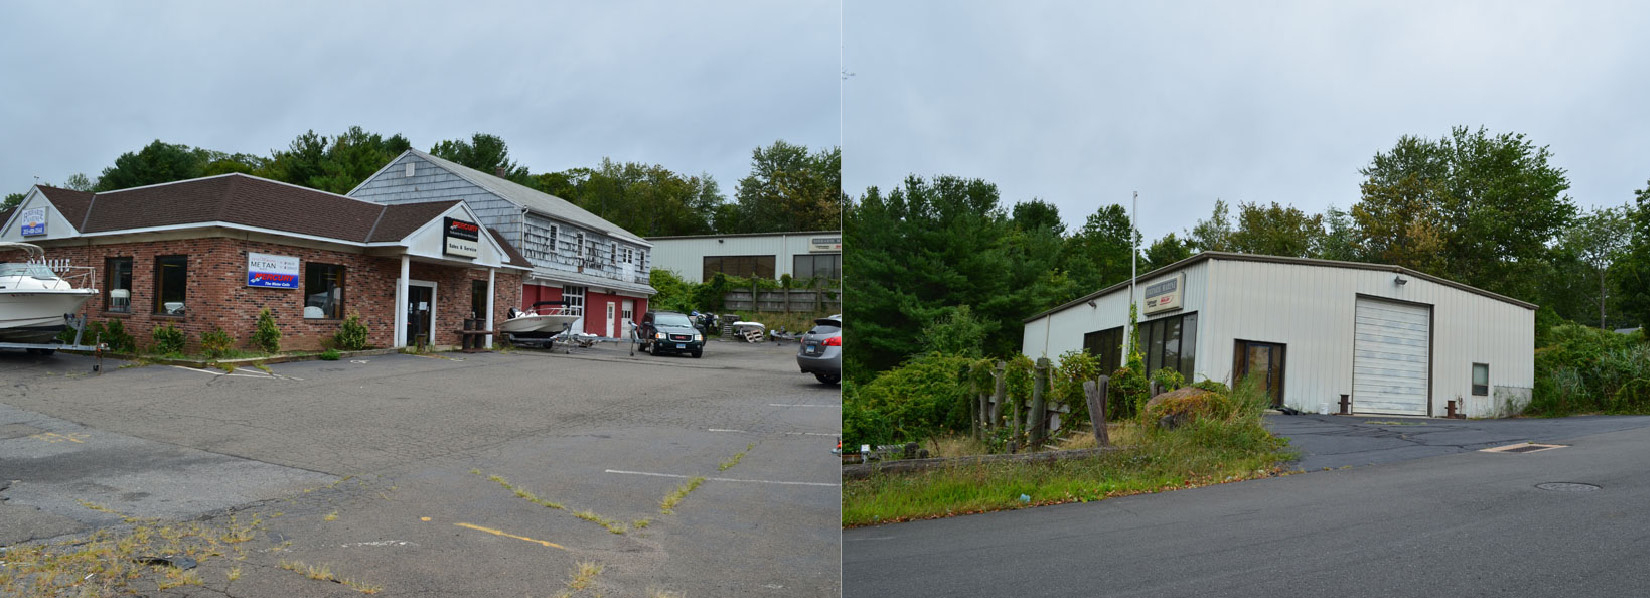 O,R&L Commercial Sells Former Birbarie Marine Totaling 11,200 SF, Route 1, Branford, CT